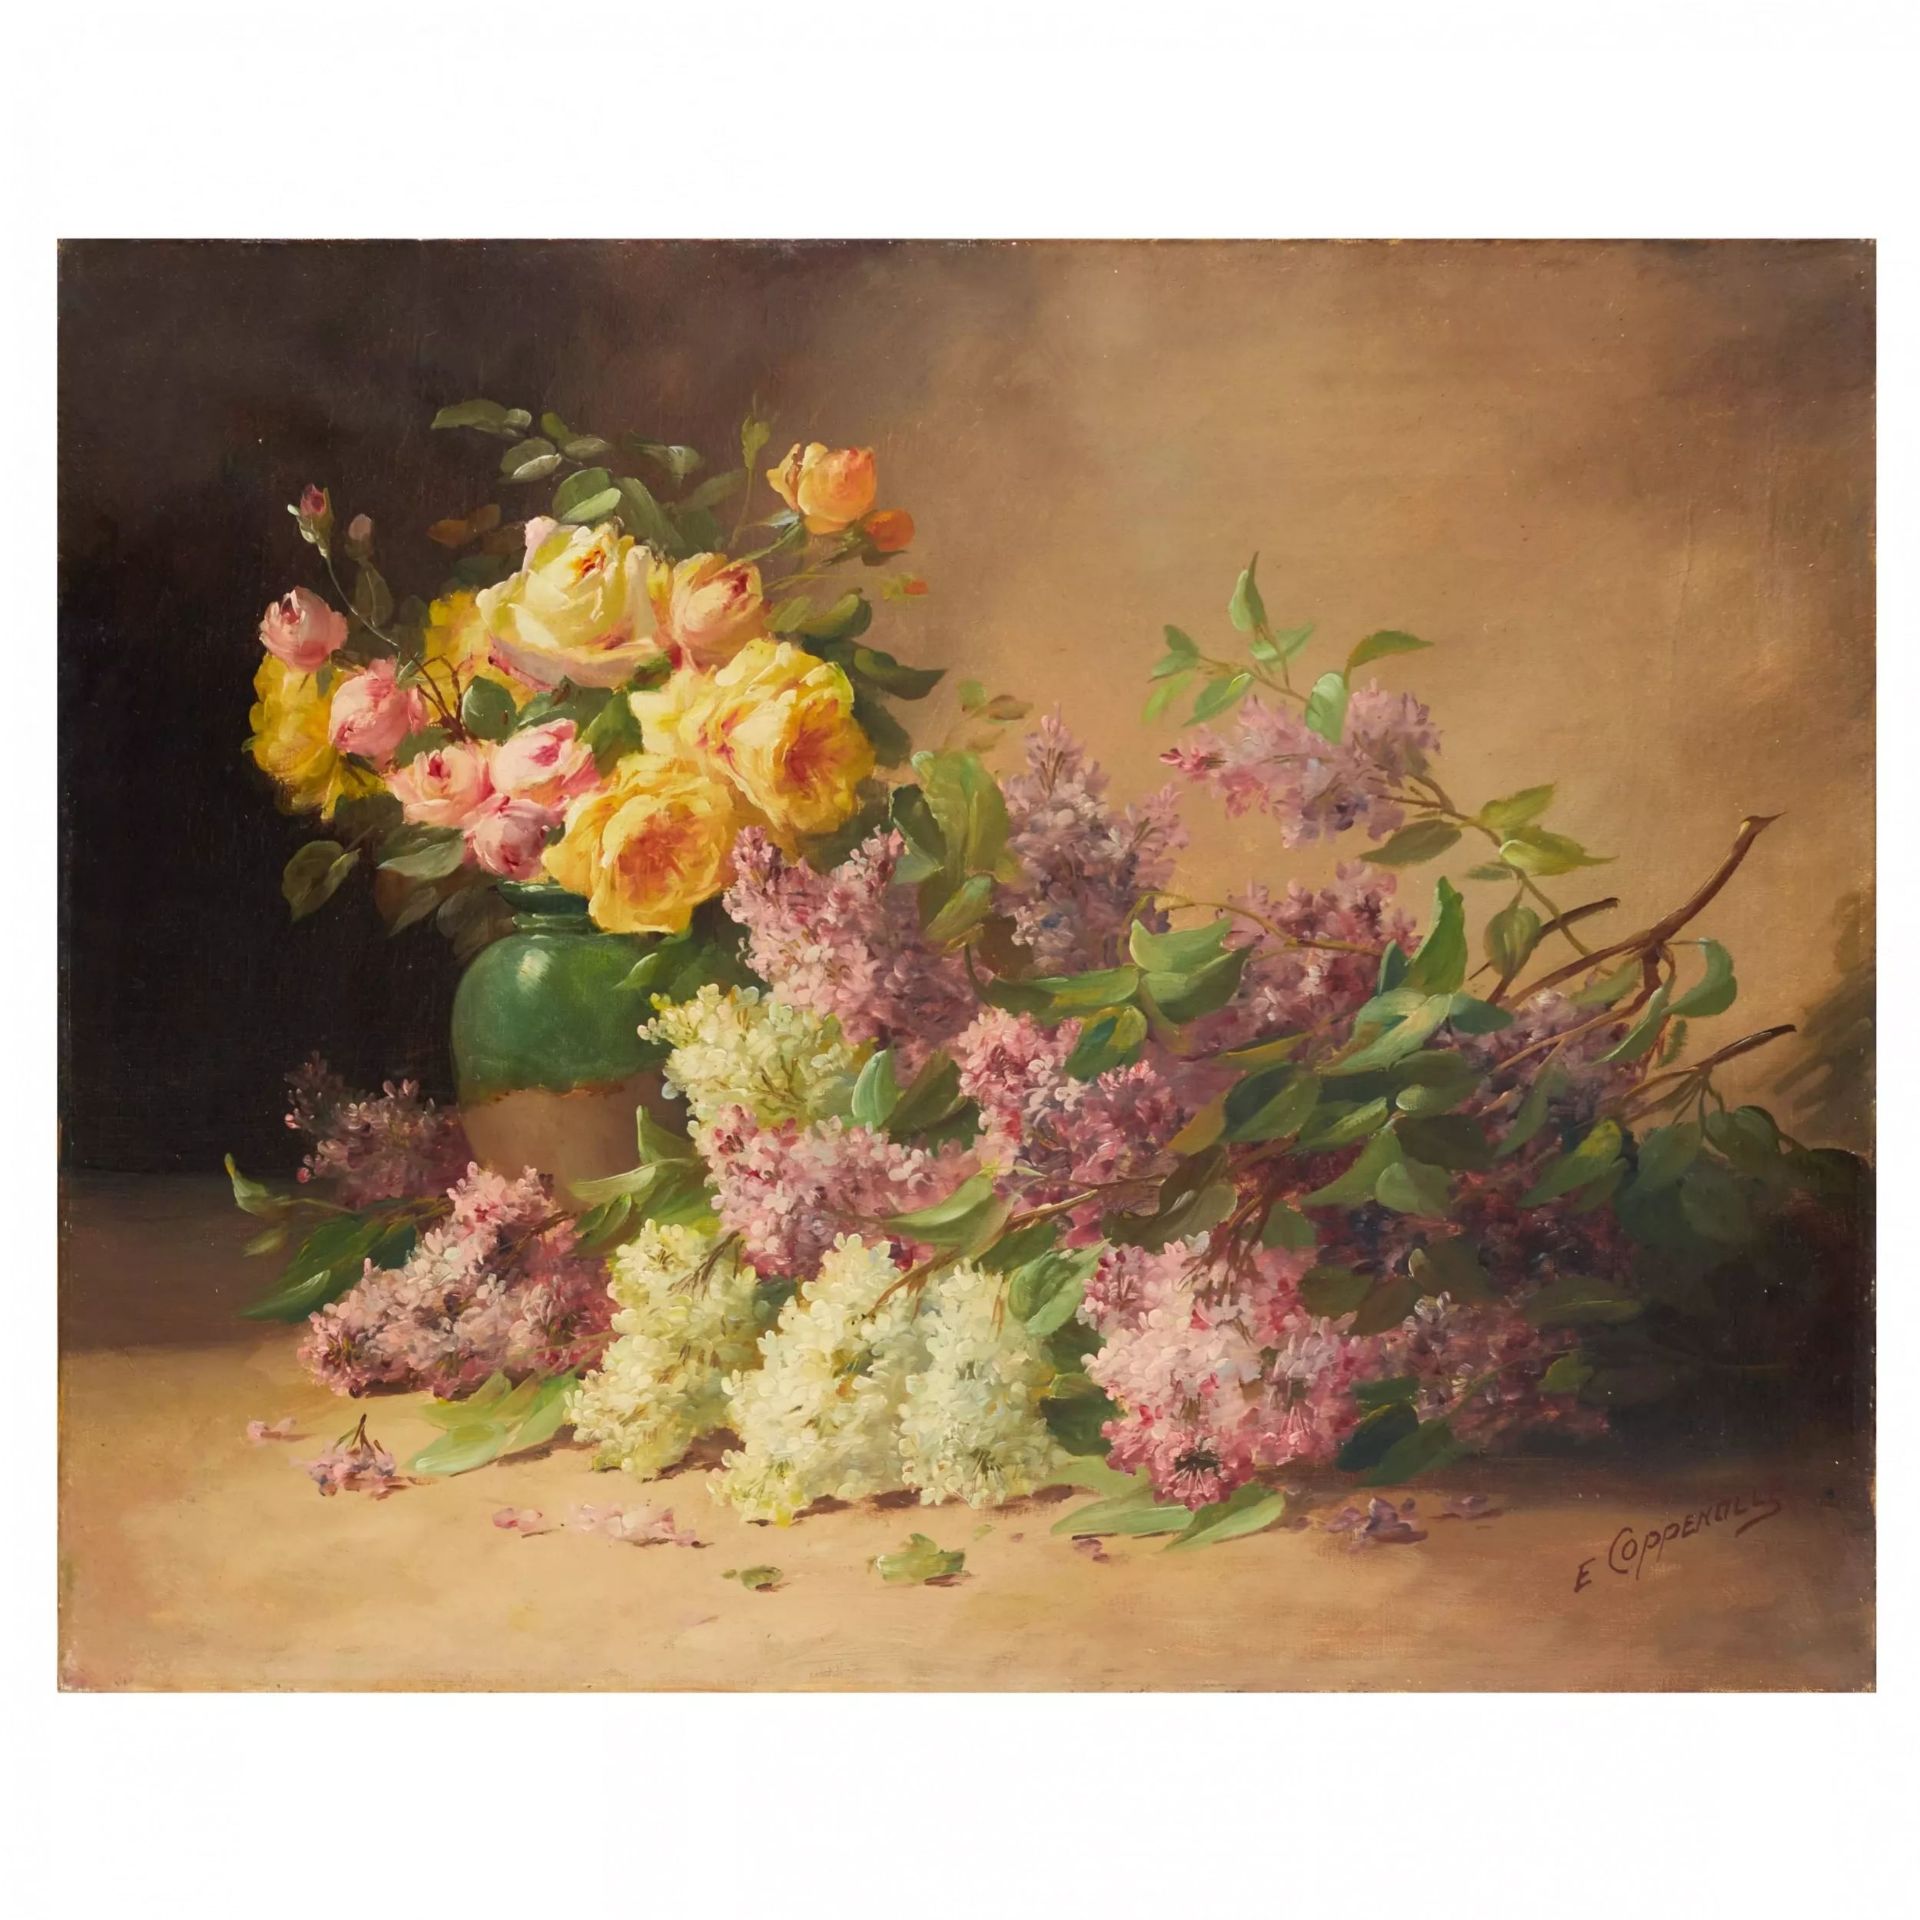 Edmond VAN COPPENOLLE. Still life with lilacs. France. 19th century. - Image 2 of 6